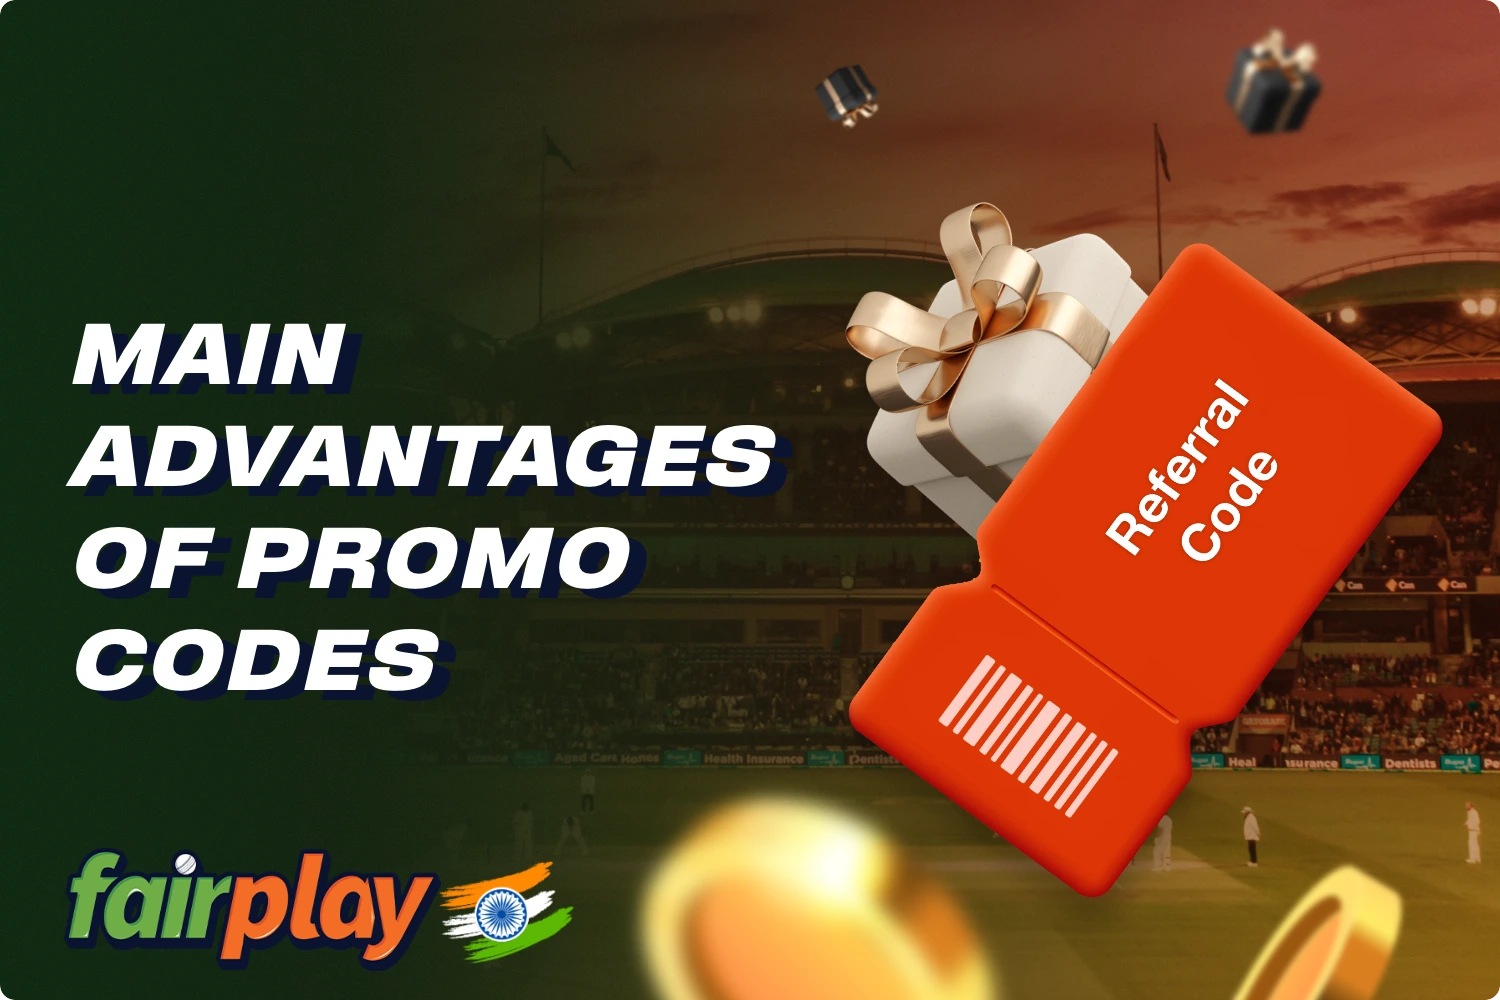 Fairplay promo code has several advantage that players from India should be aware of in advance